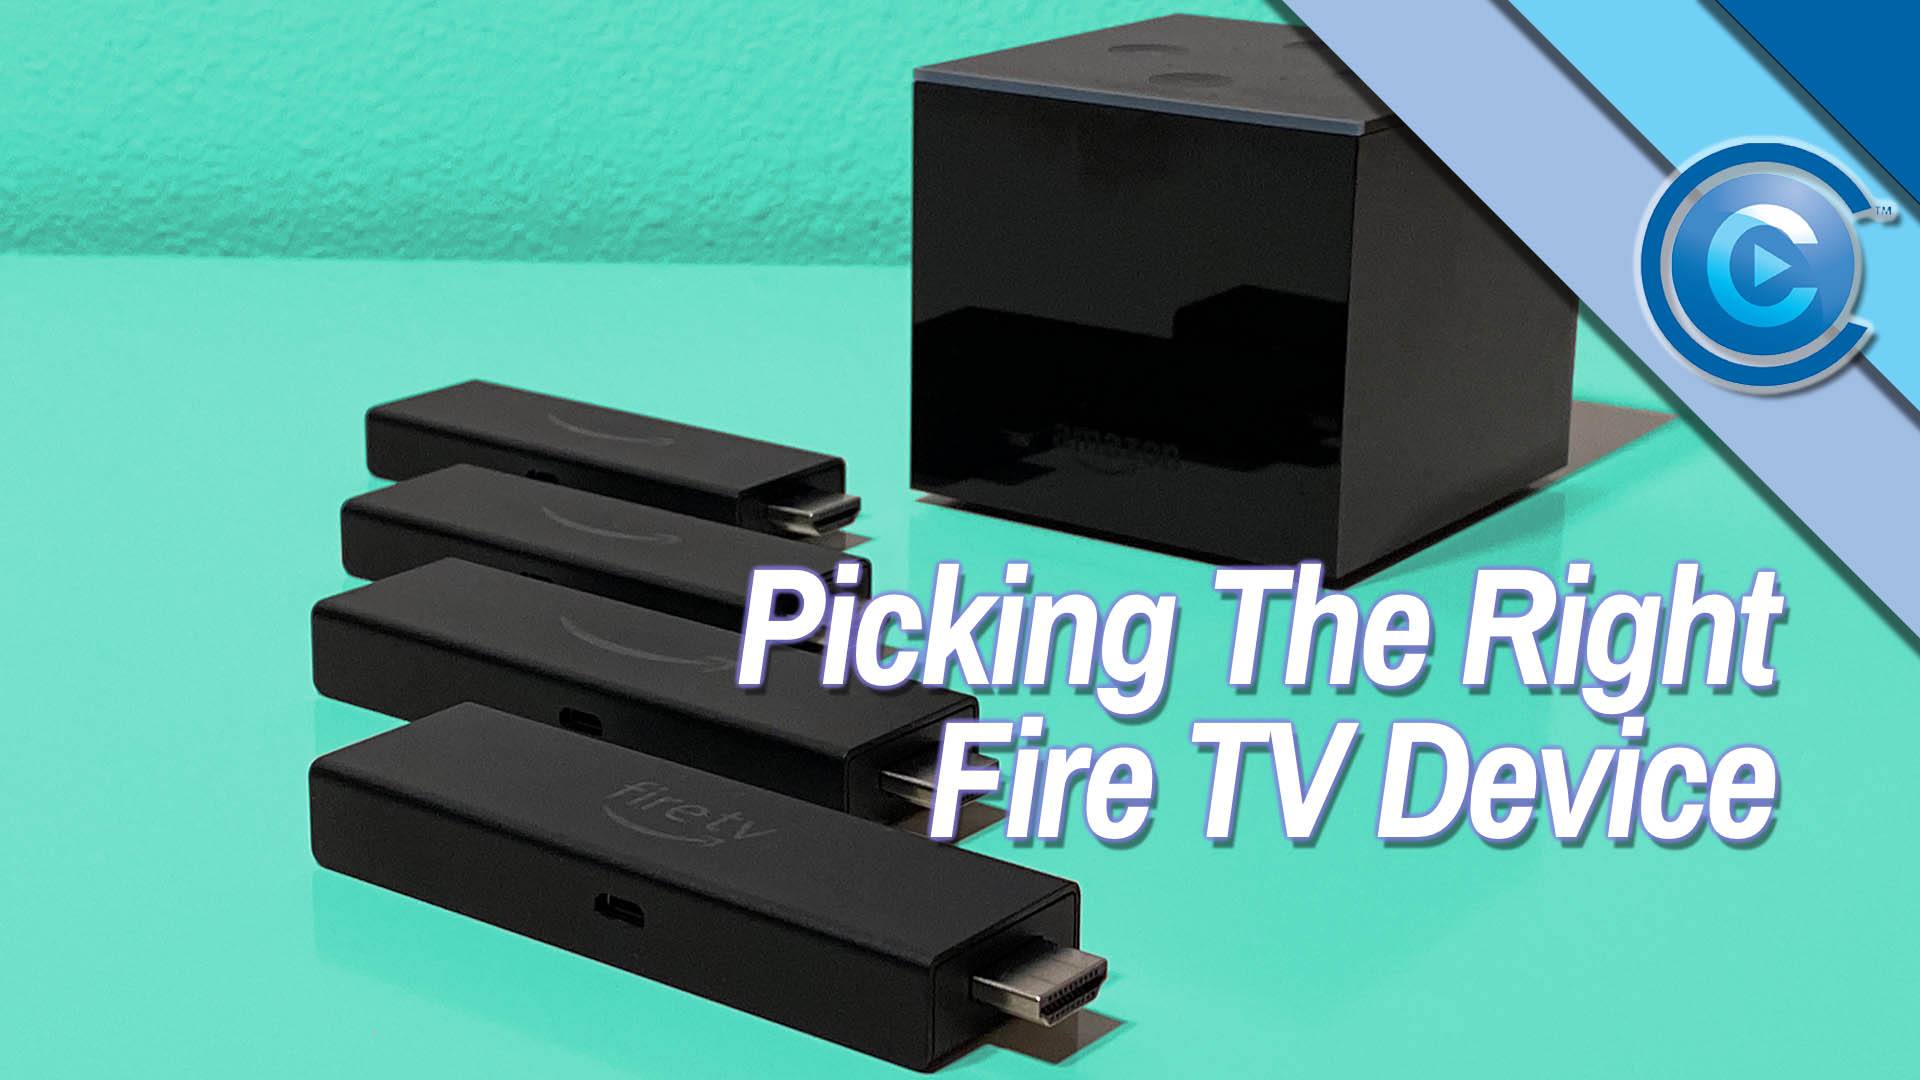 Video: Picking The Right Fire TV Device For You